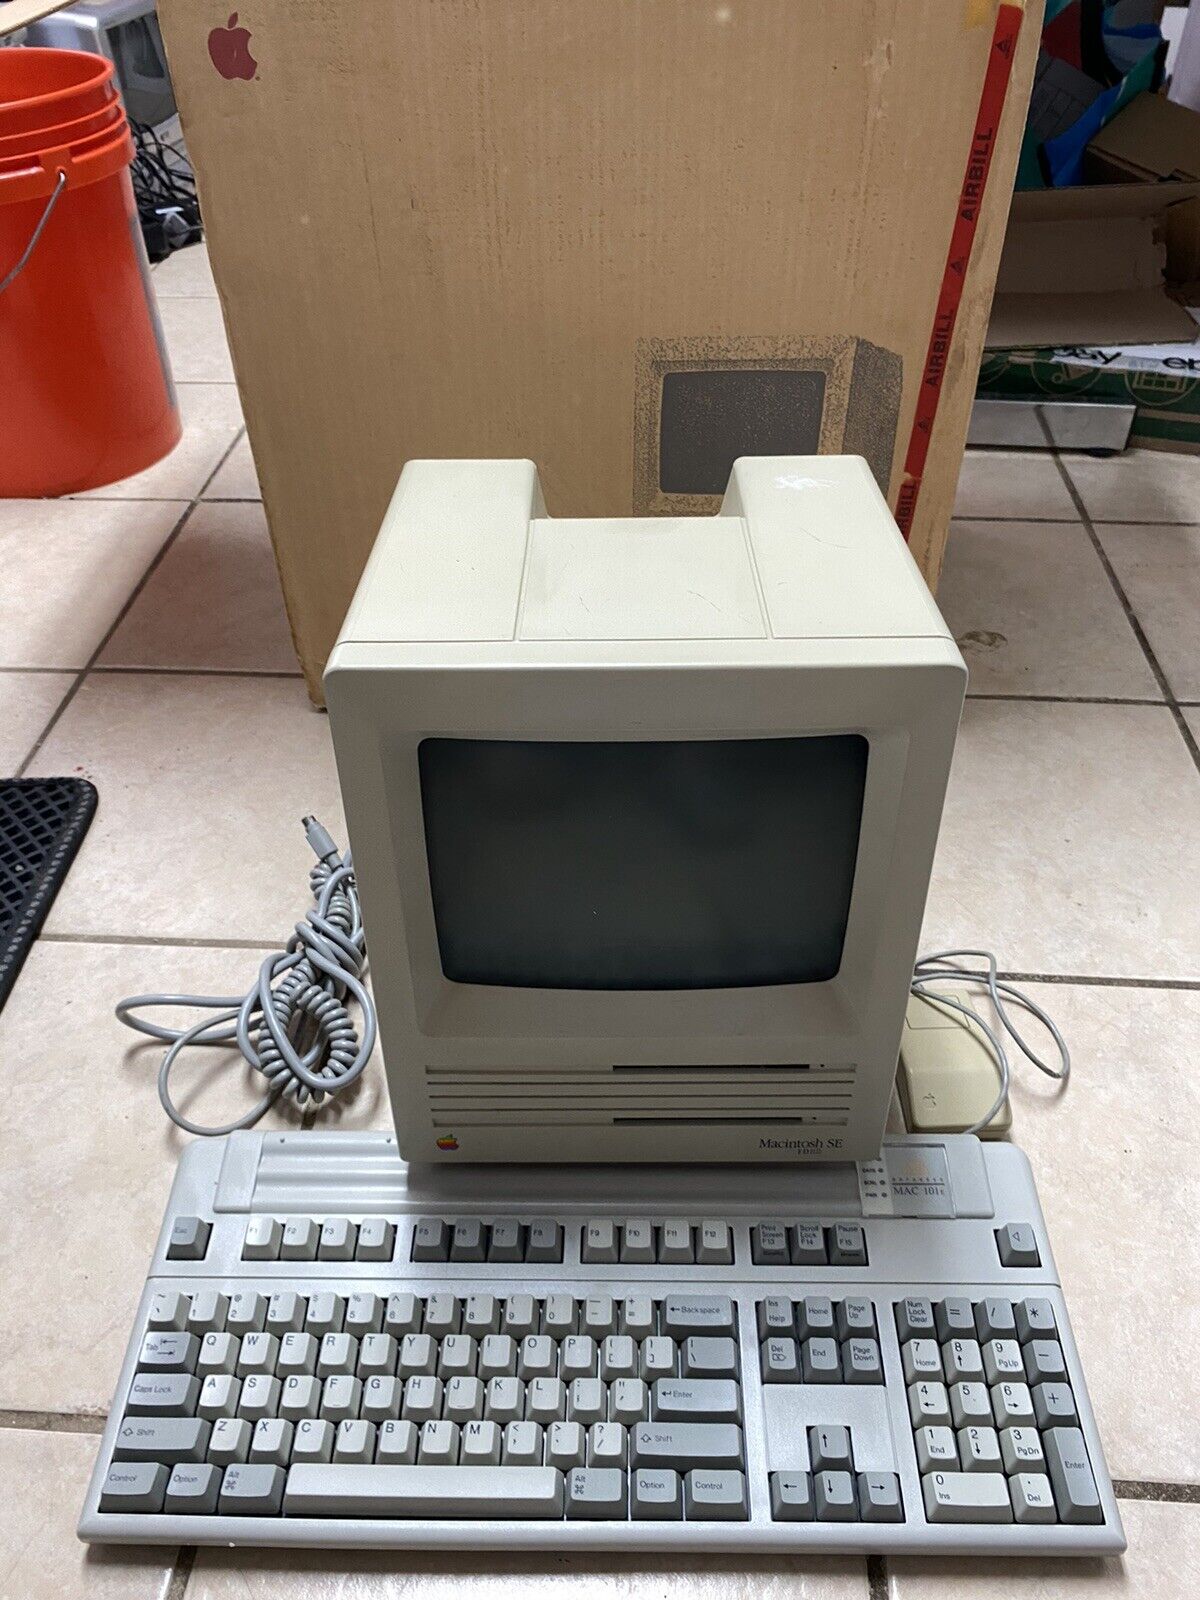 APPLE MACINTOSH SE FDHD All In One Vintage Computer - Model M5011 With BOX